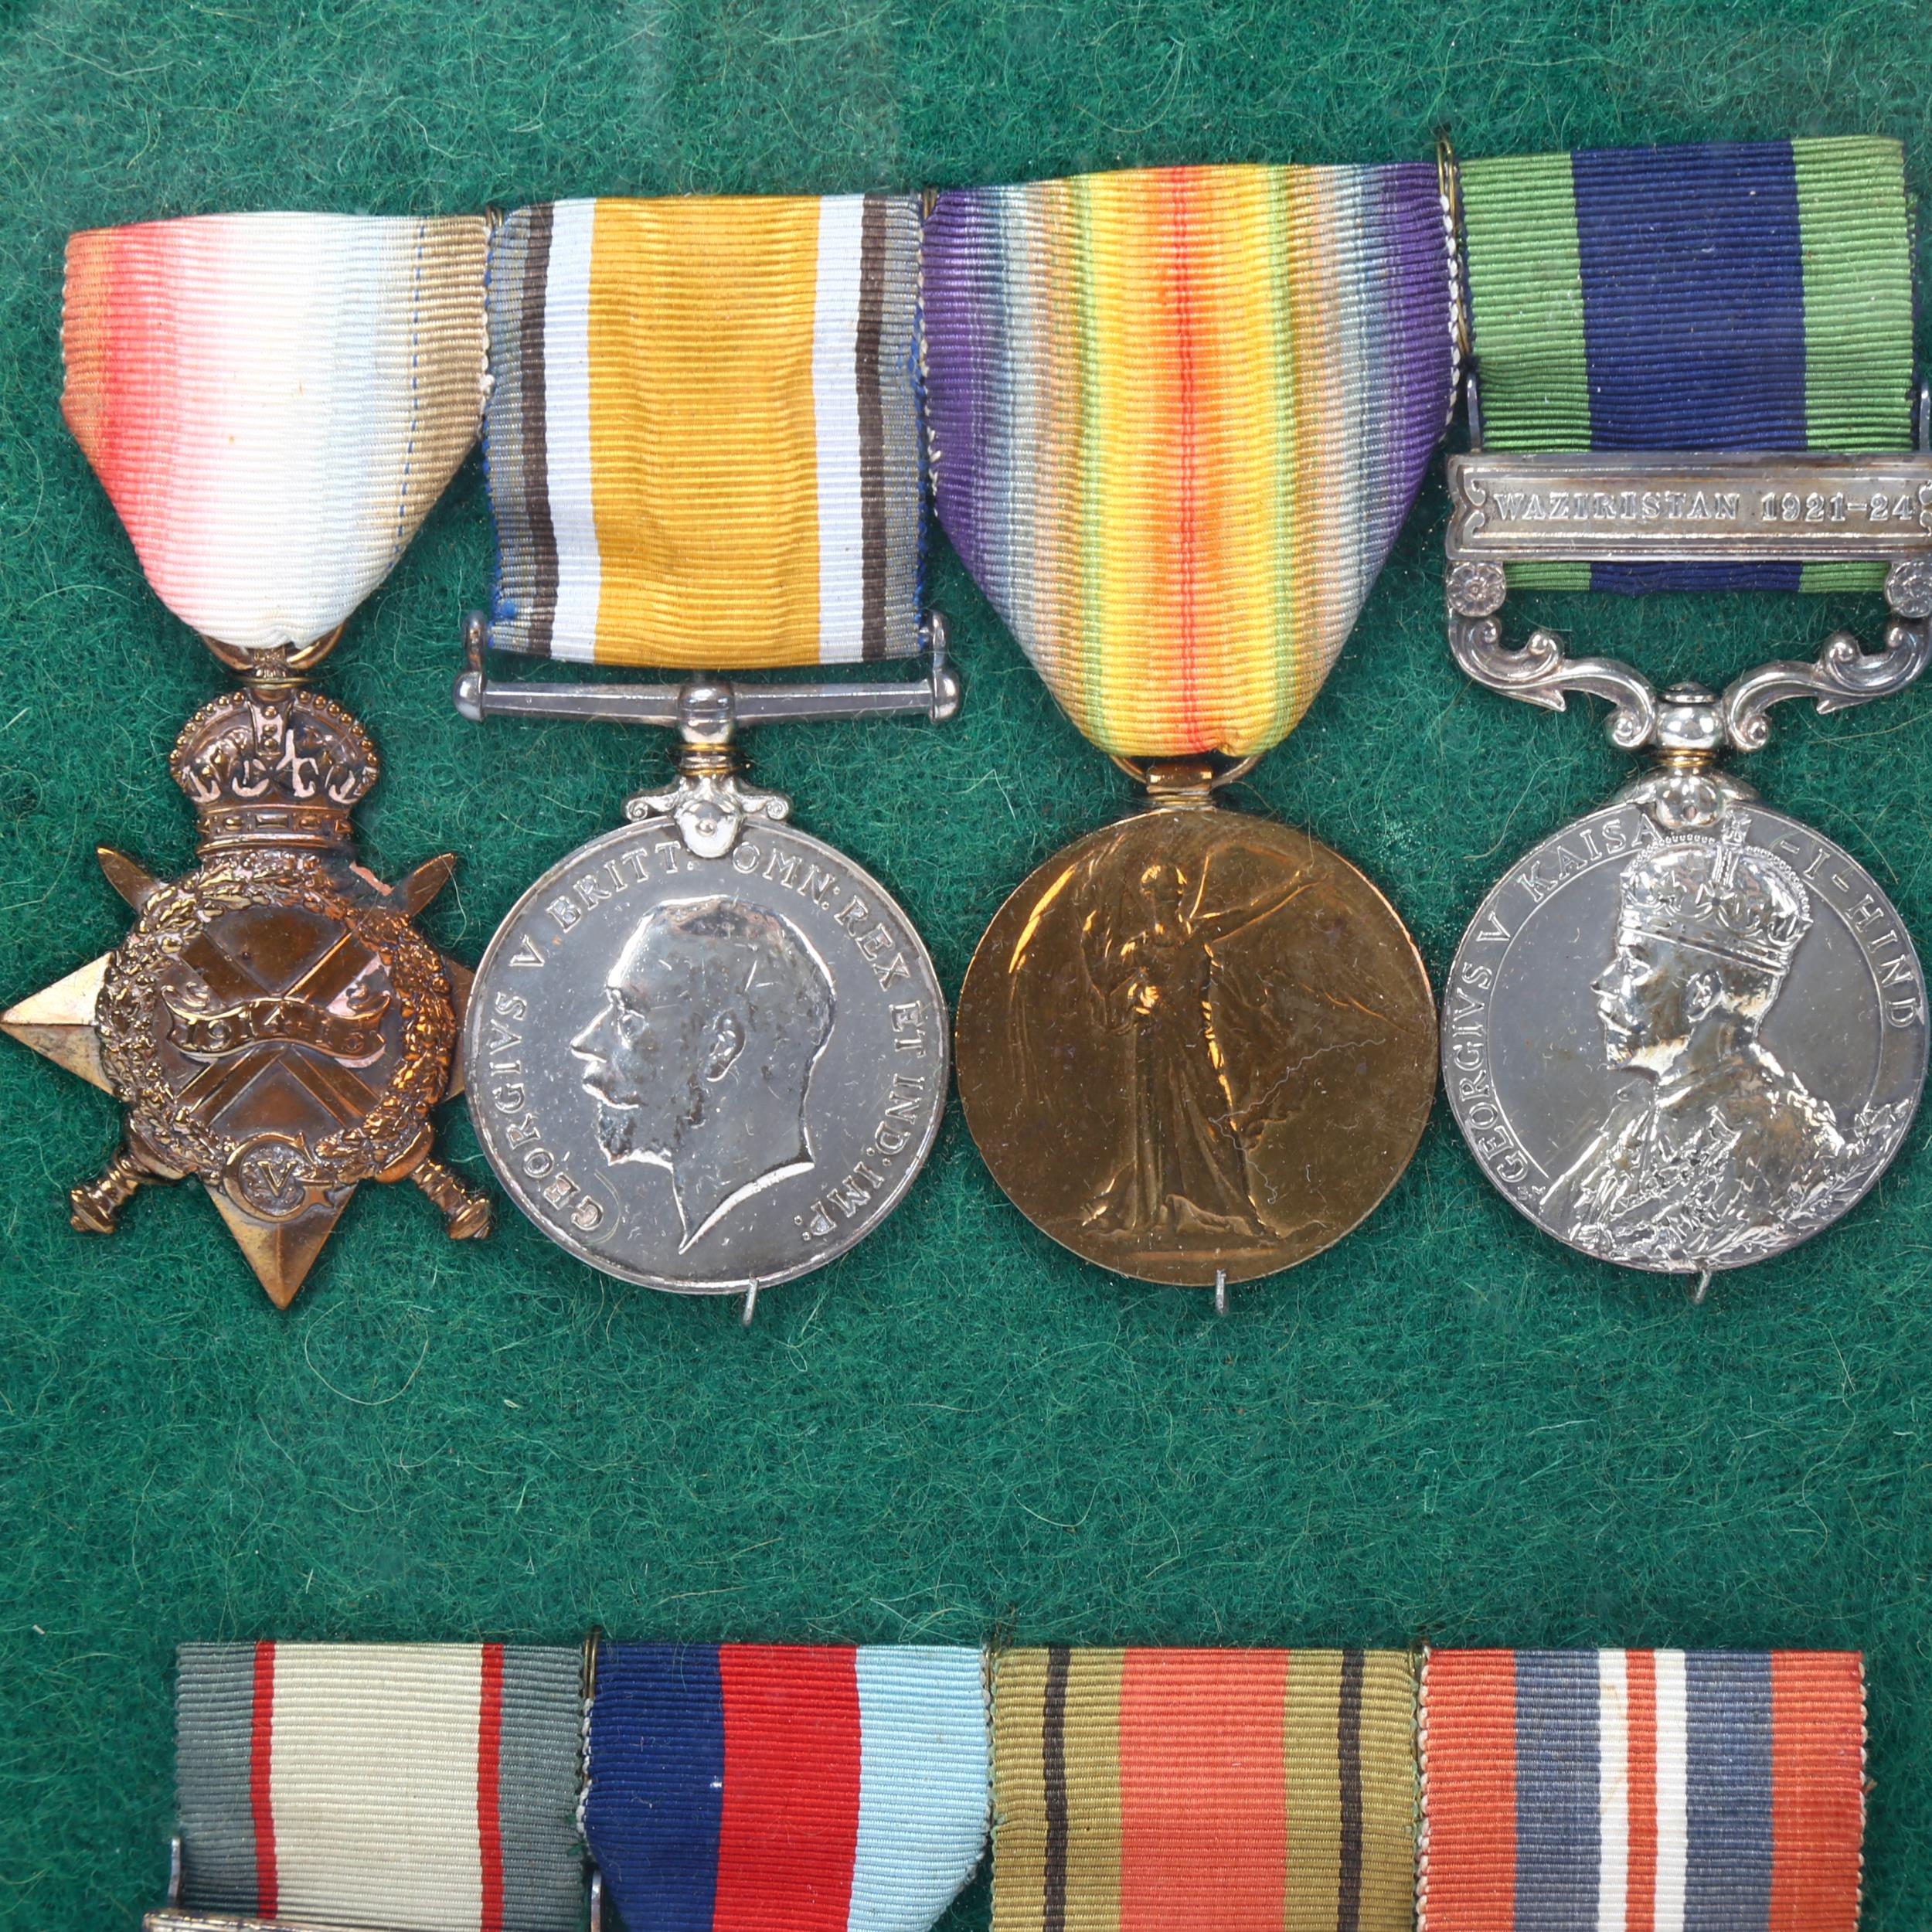 A group of 8 Great War and Second War Service medals, awarded to Major JH Rigg, 8th Punjab Regiment, - Image 2 of 3